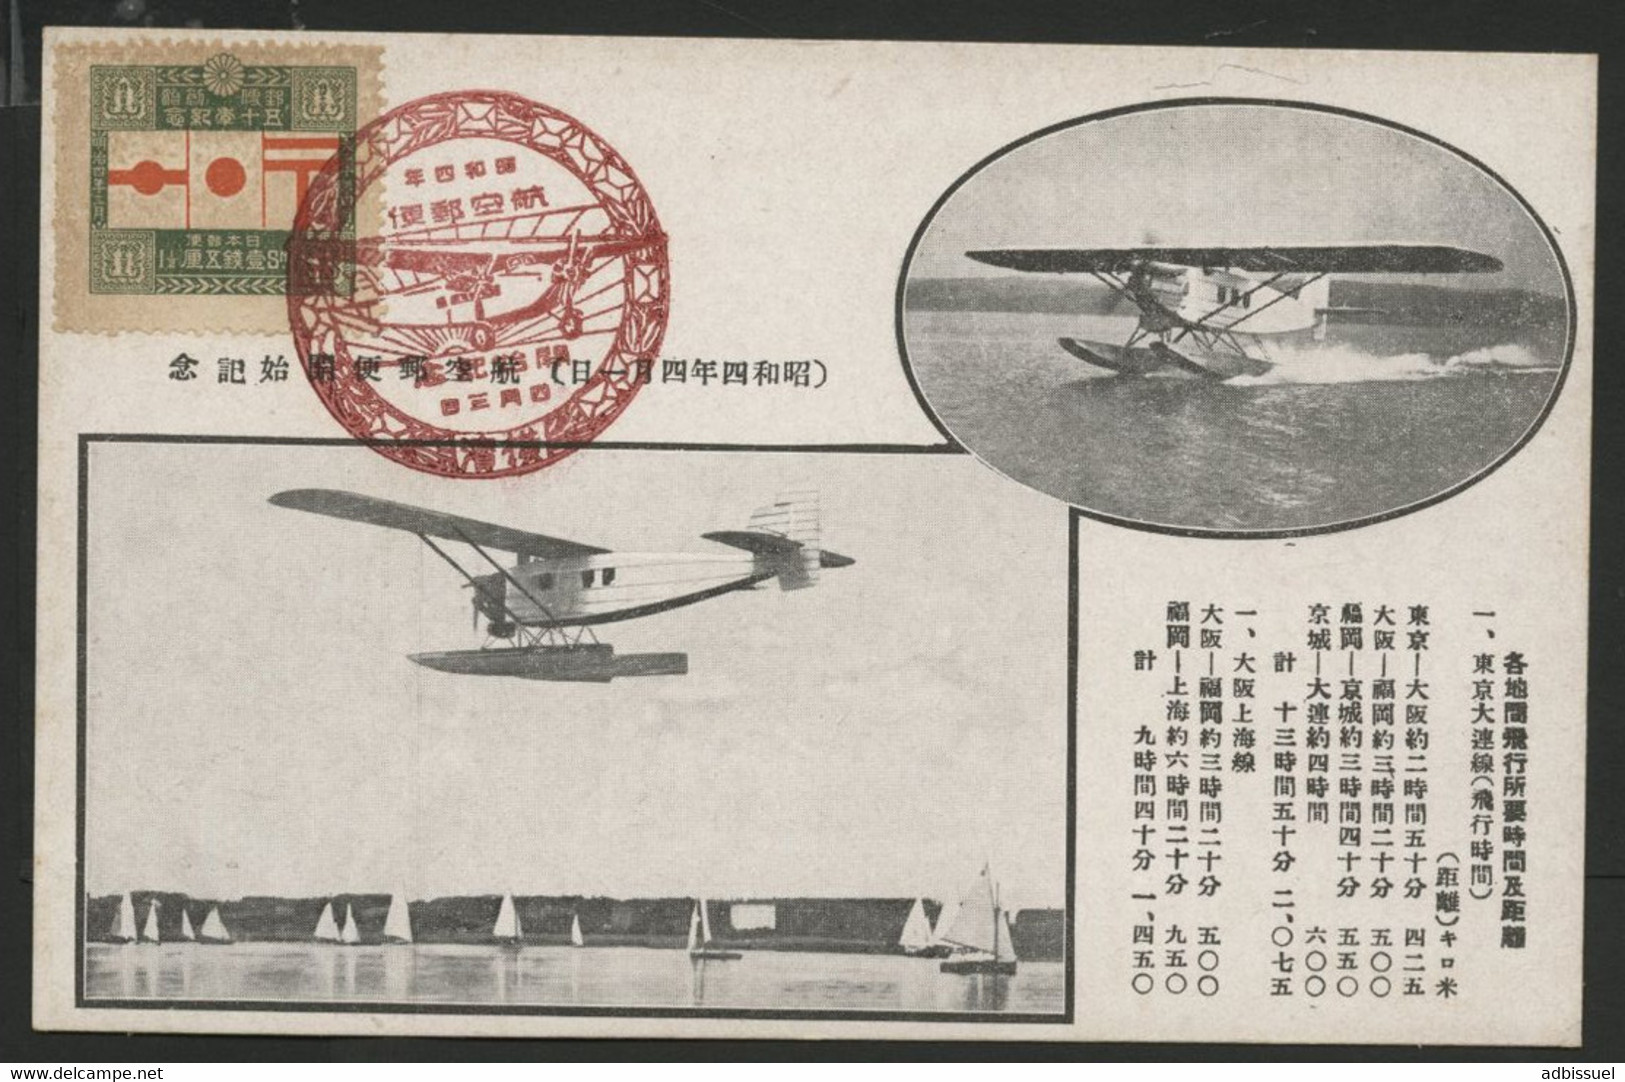 JAPAN 1929 C28 (162) First Flight Commemorative Cancellation On A Postcard Showing The Plane Which Made The Route. - Covers & Documents